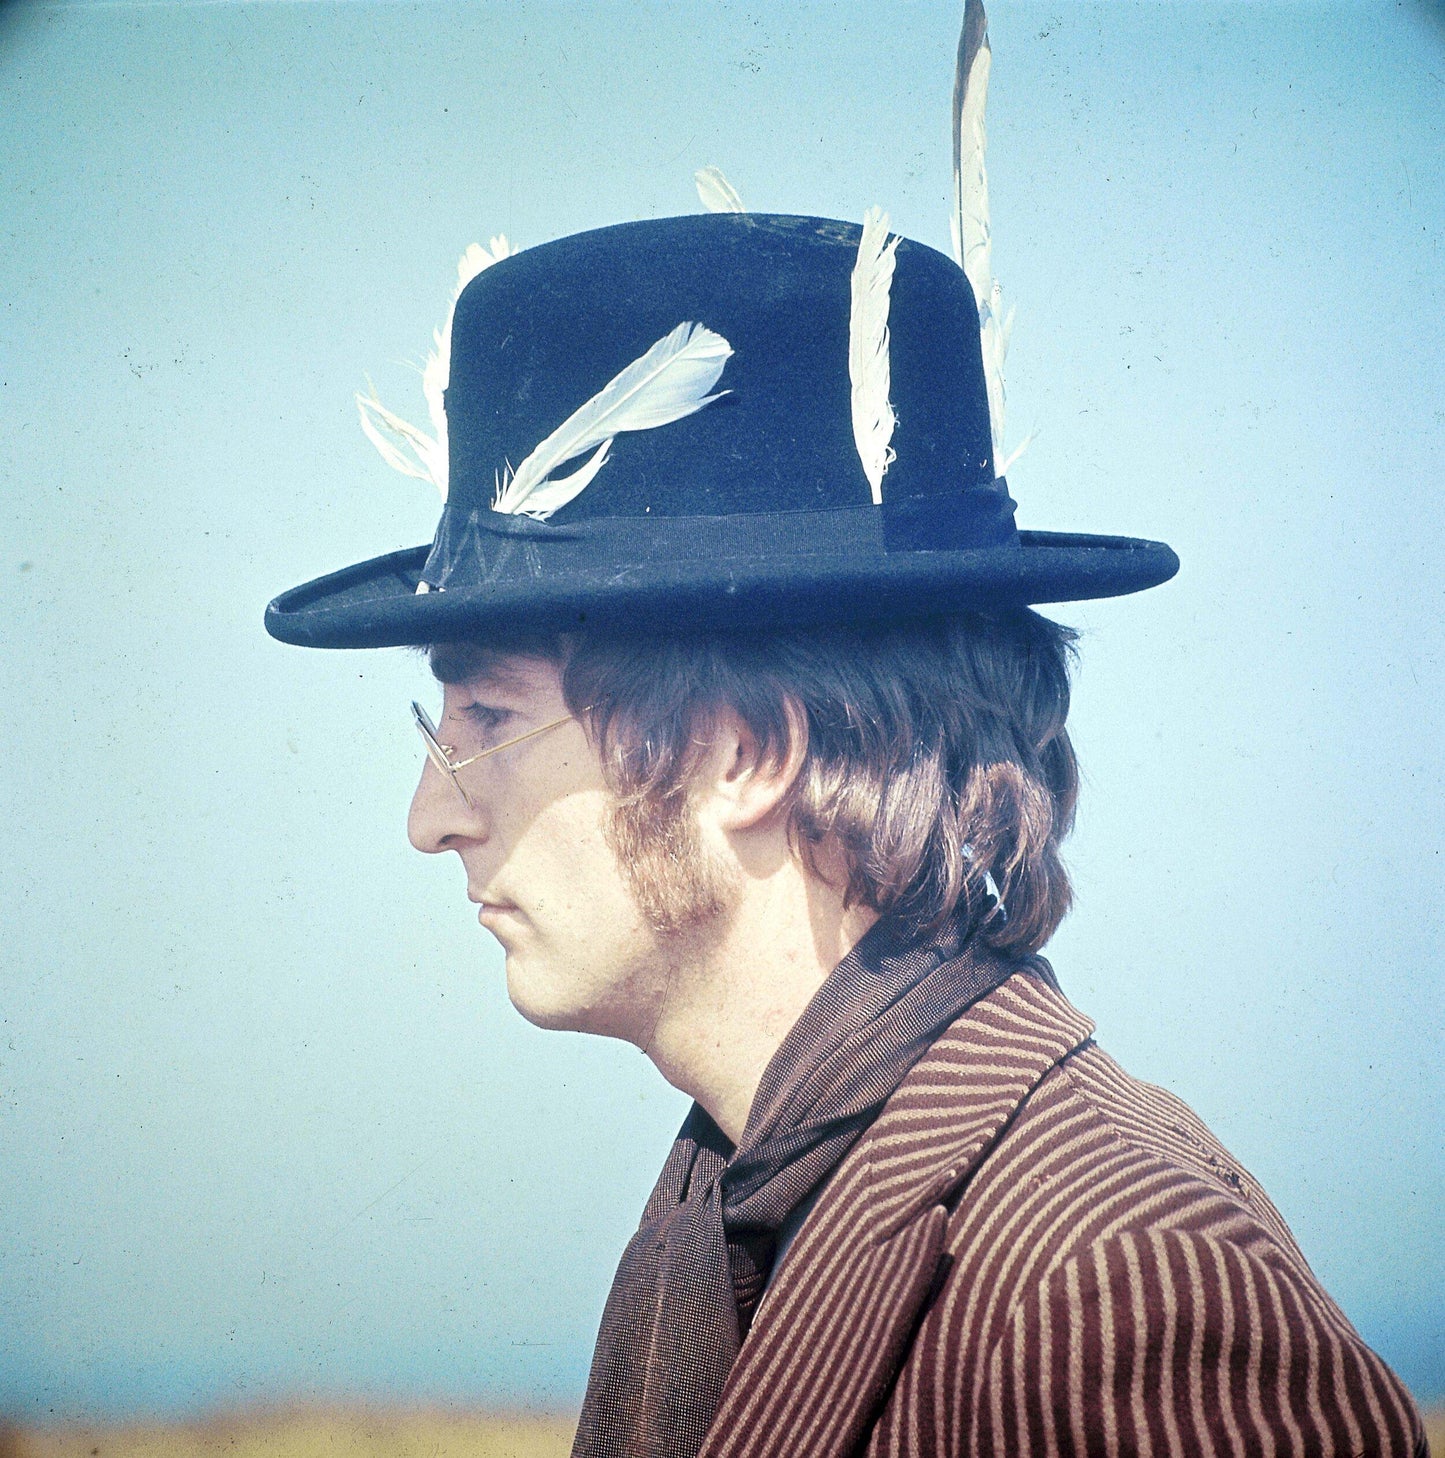 John Lennon by David Redfern photo for sale Getty Images Gallery